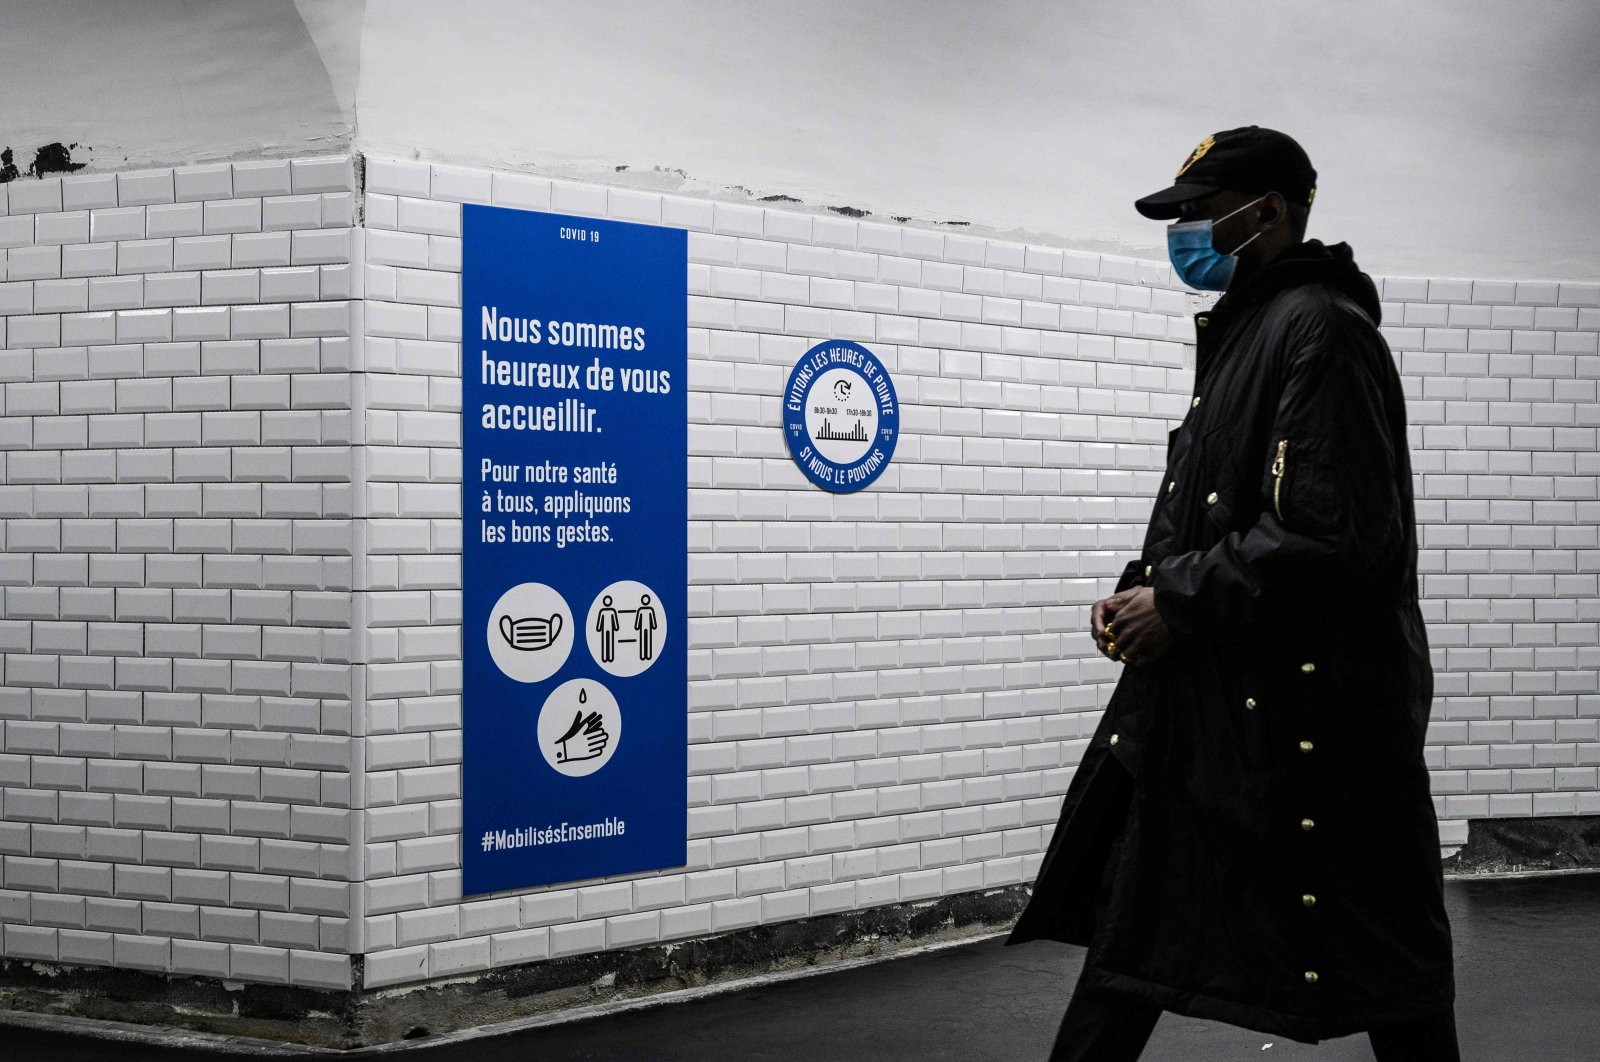 A commuter wearing a protective face mask walks past safety guideline signs in a metro station in Paris, France, May 14, 2020. (AFP Photo)